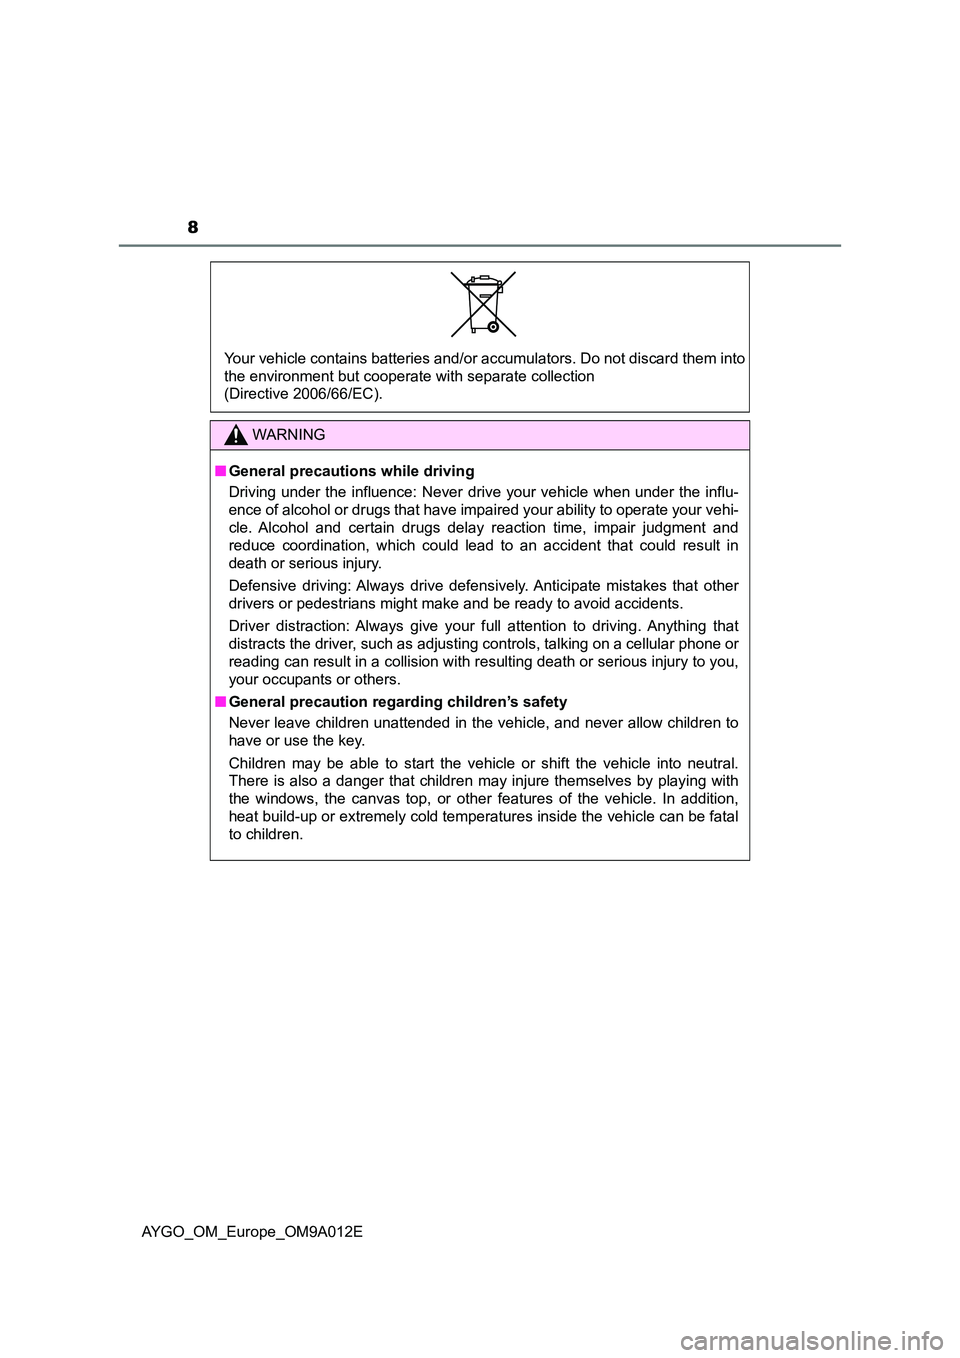 TOYOTA AYGO 2021  Owners Manual 8
AYGO_OM_Europe_OM9A012E
WARNING
■General precautions while driving 
Driving under the influence: Never drive your vehicle when under the influ- 
ence of alcohol or drugs that have impair ed your a